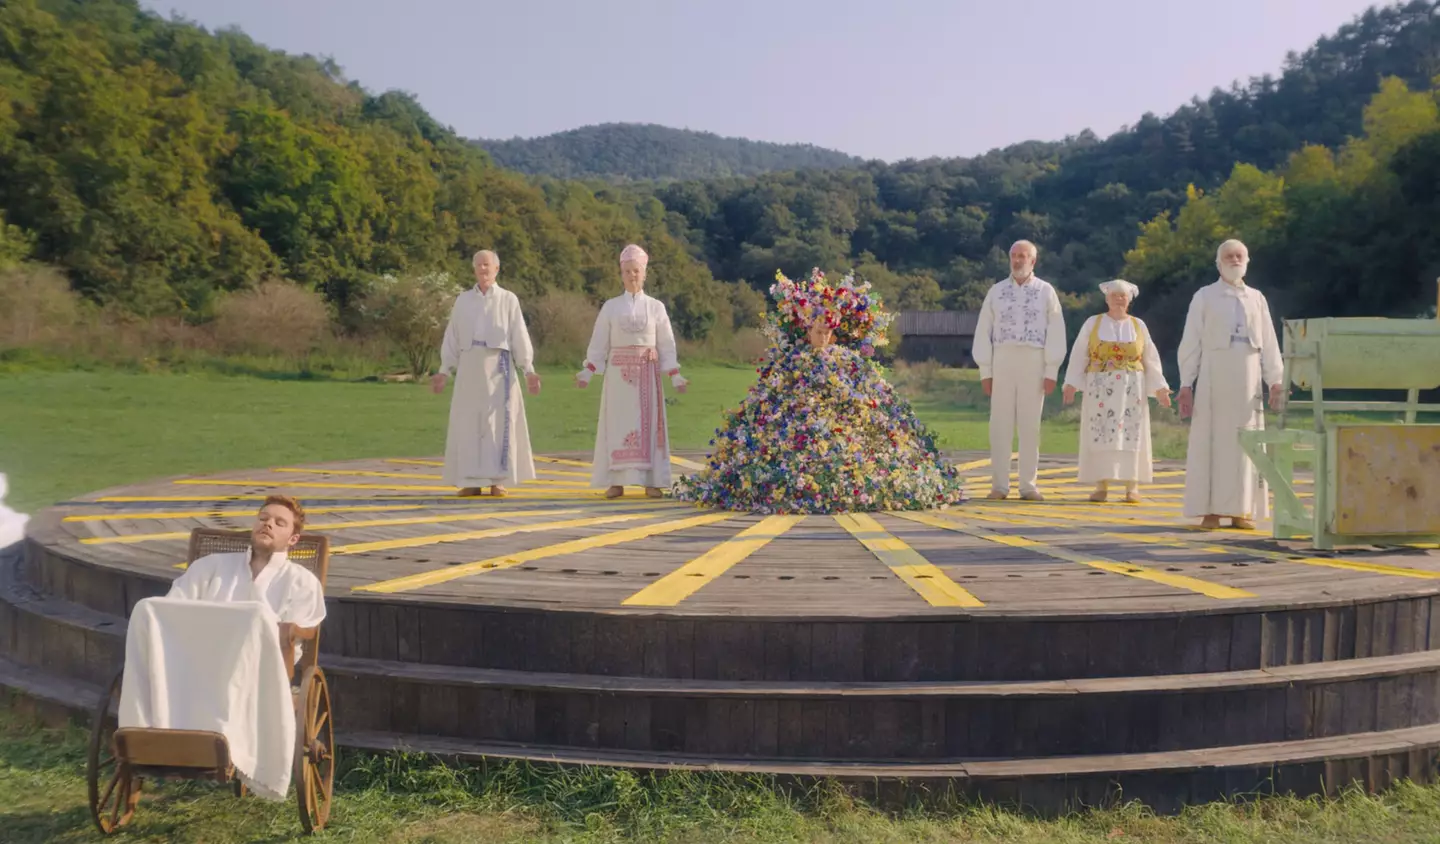 The real-life festival is not at all like the one Midsommar portrays.